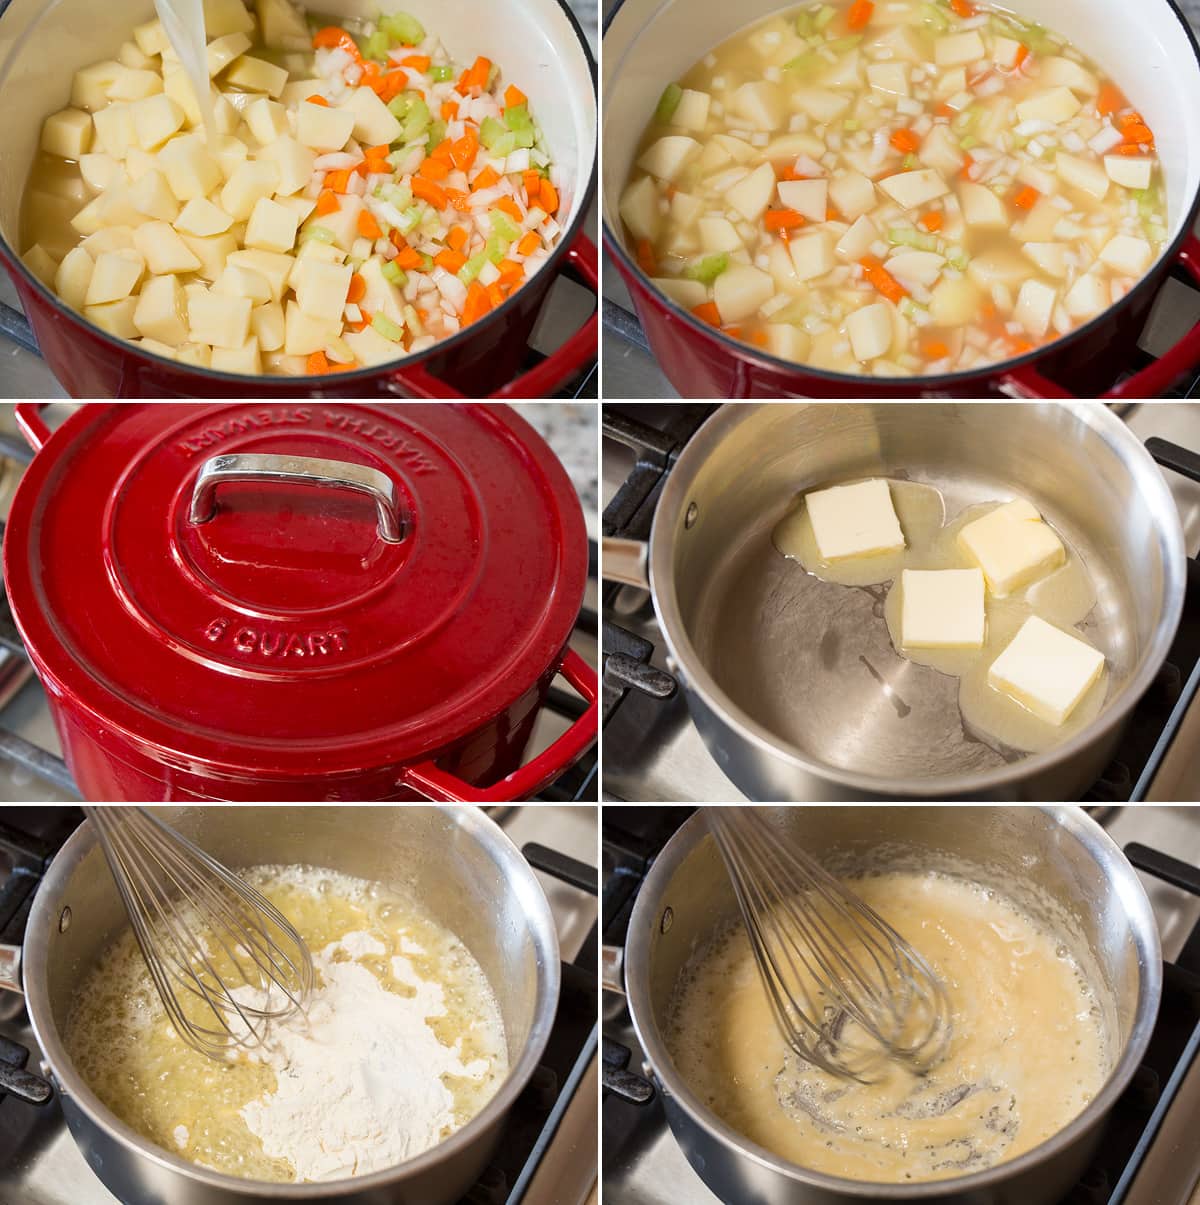 Collage of six photos showing steps to making potato soup. Shows simmering potatoes, carrots, celery and onion in chicken broth. Then includes first steps of making roux by melting butter and mixing with flour.